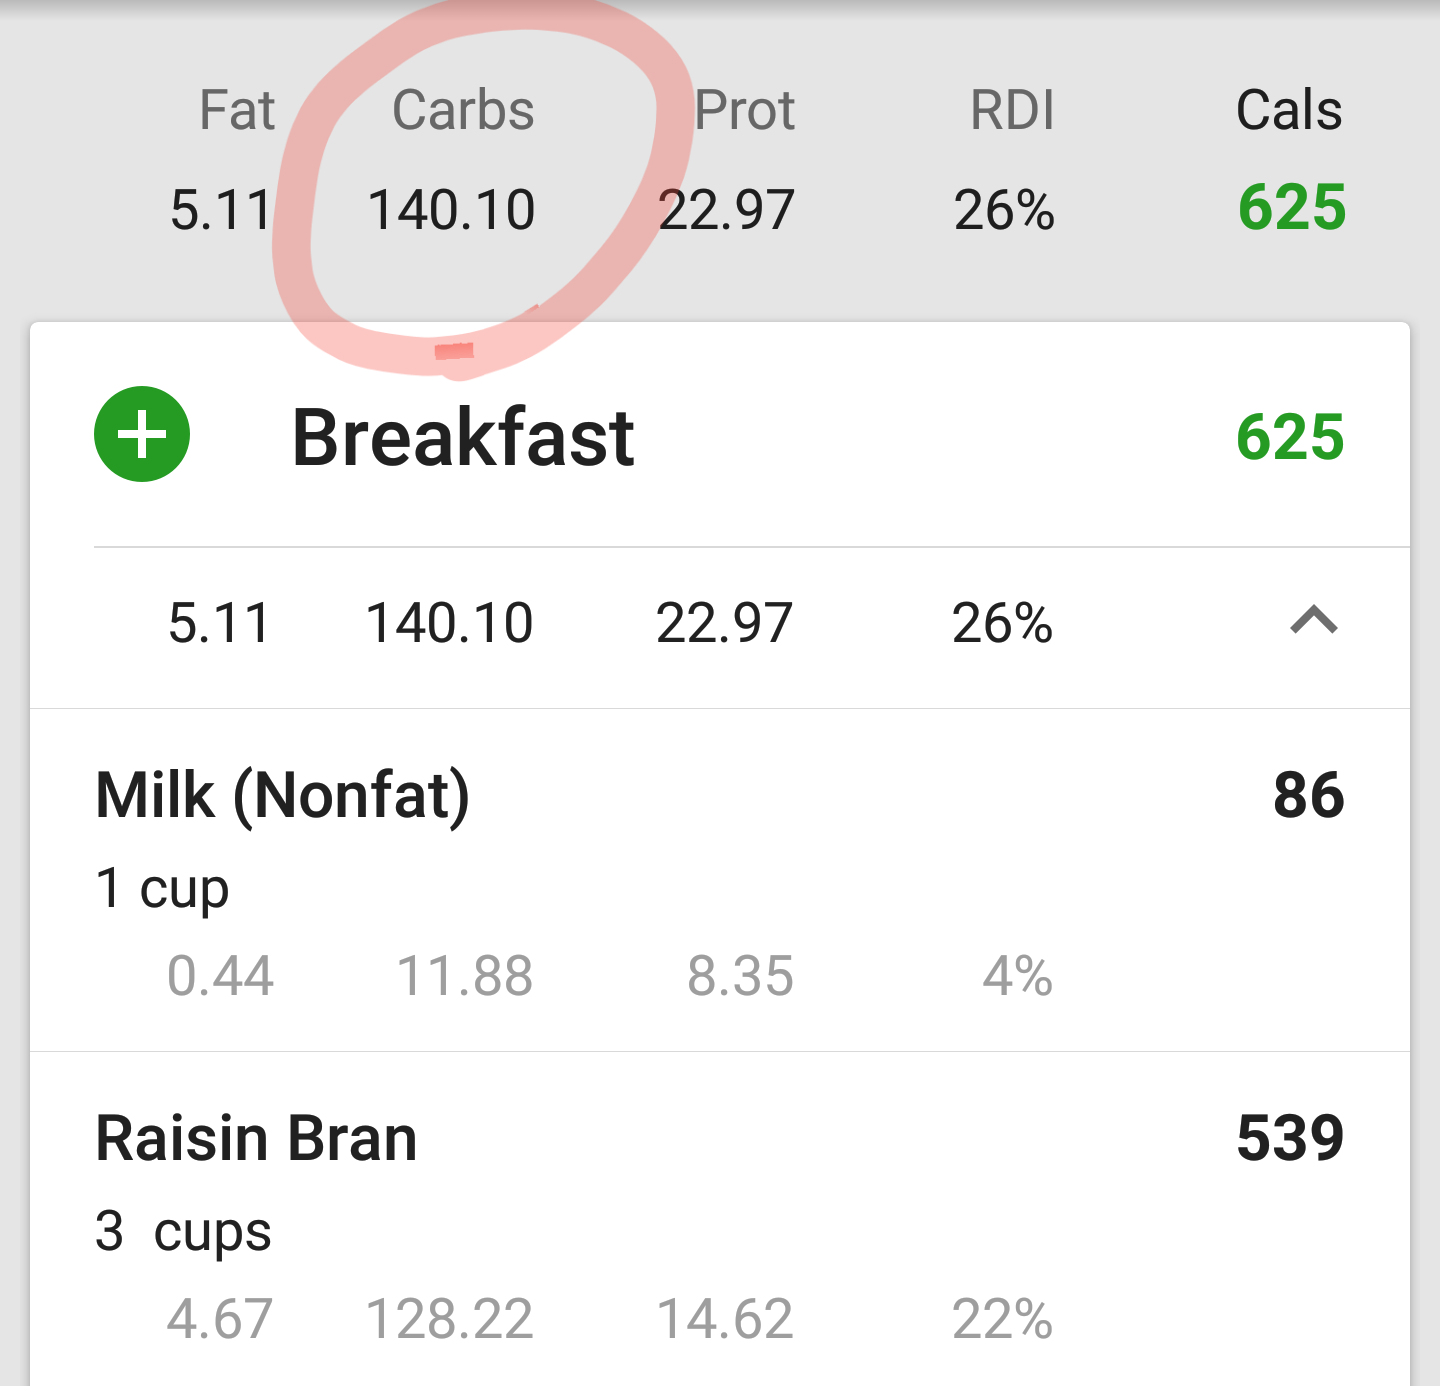 In case you didn't believe Raisin Bran had that many carbs in what would be a bowl (some people might even be eating more!)